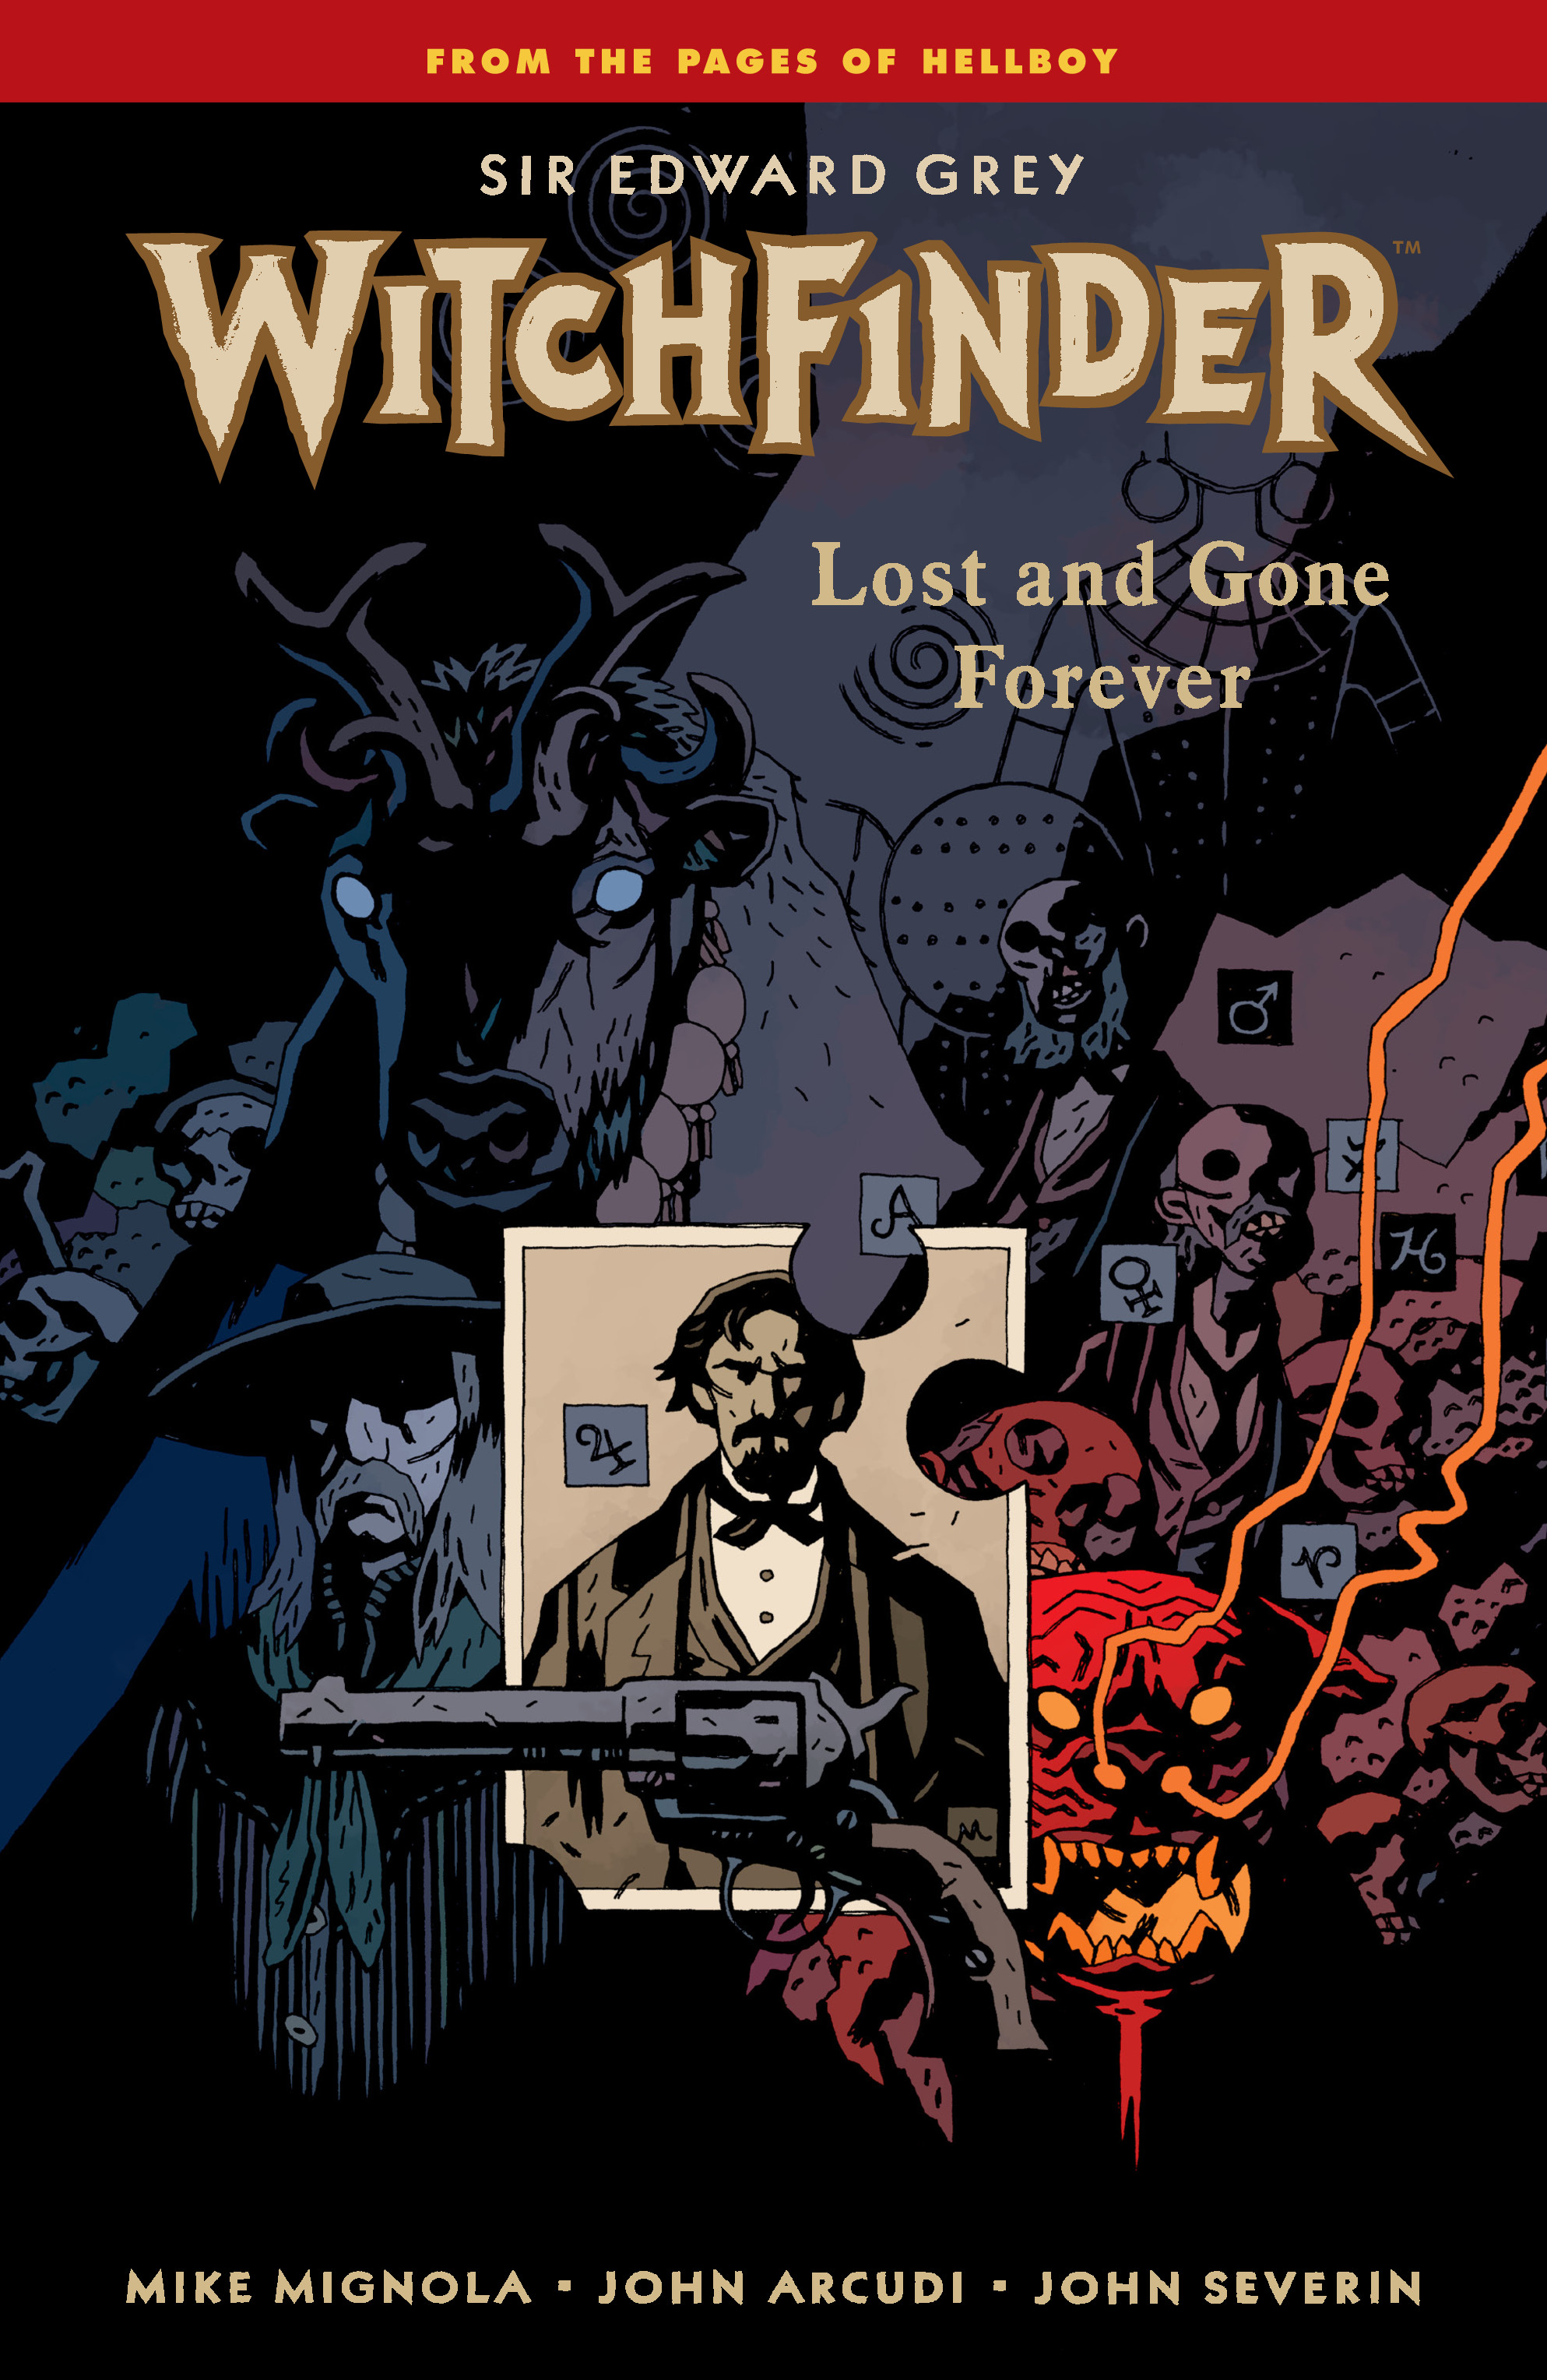 Read online Sir Edward Grey, Witchfinder: Lost and Gone Forever comic -  Issue # TPB - 1